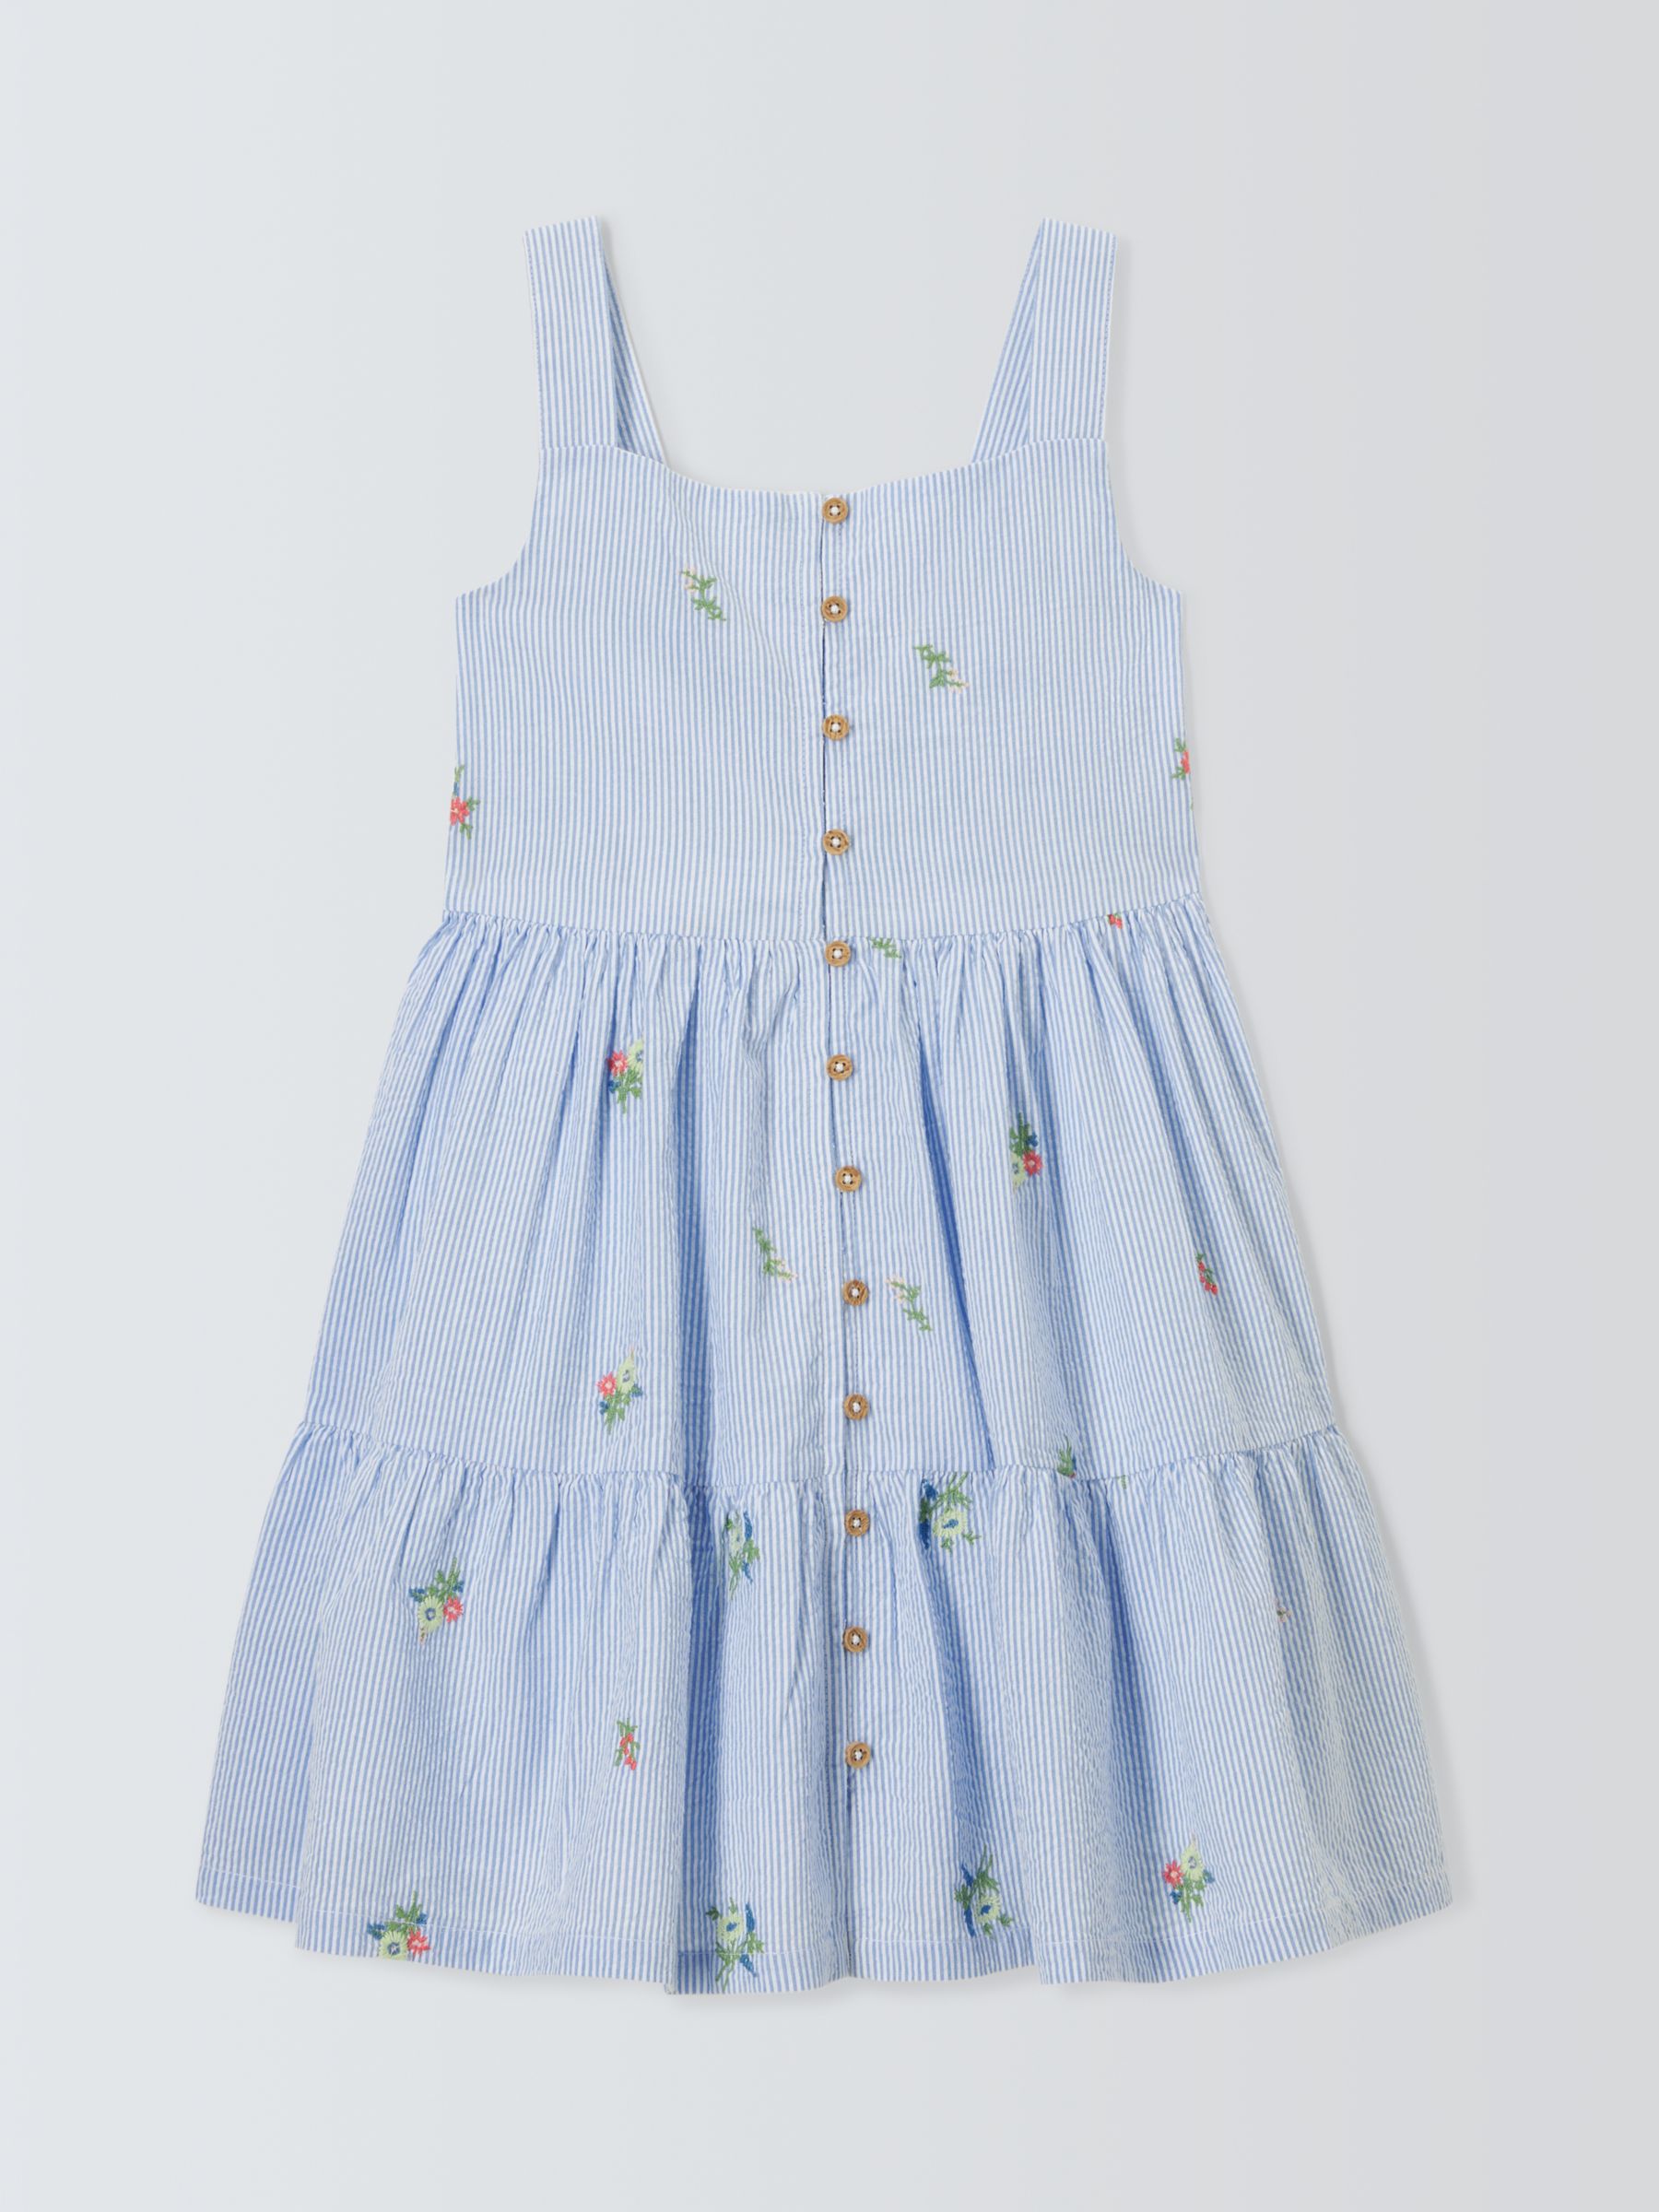 John Lewis Kids' Pinstripe Embroided Tiered Dress, Blue/White, 4 years